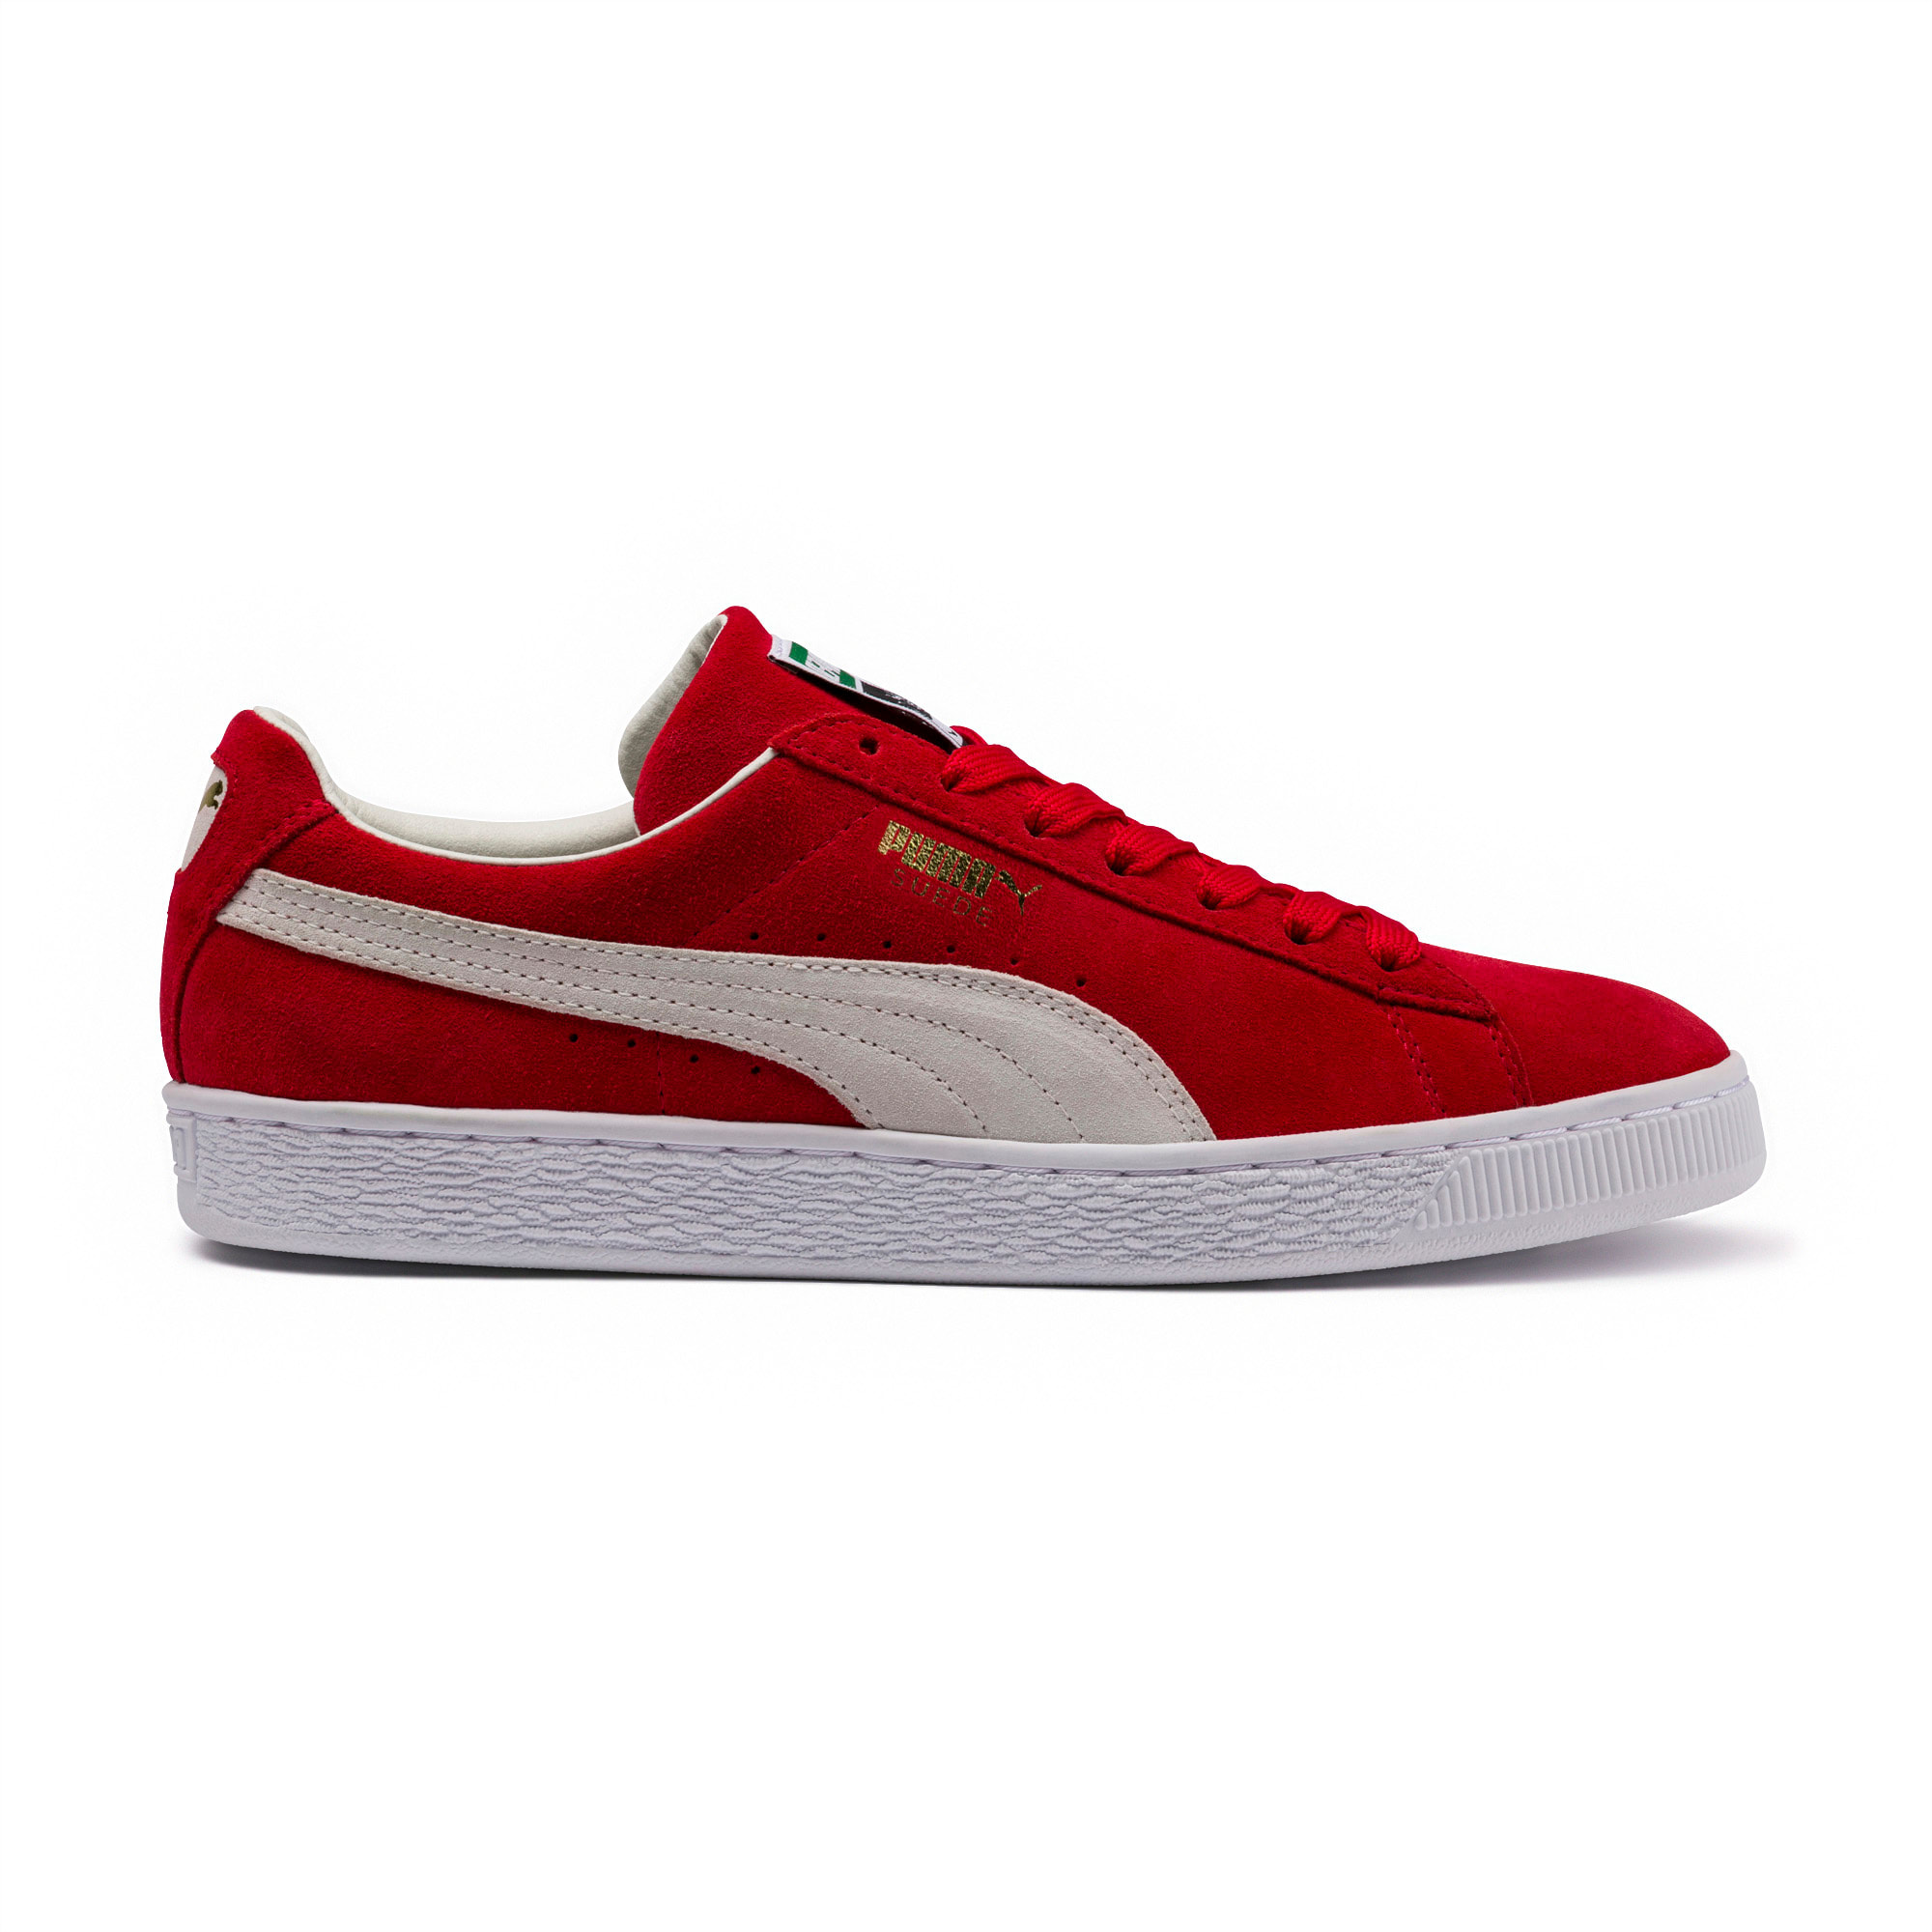 puma suede thick laces